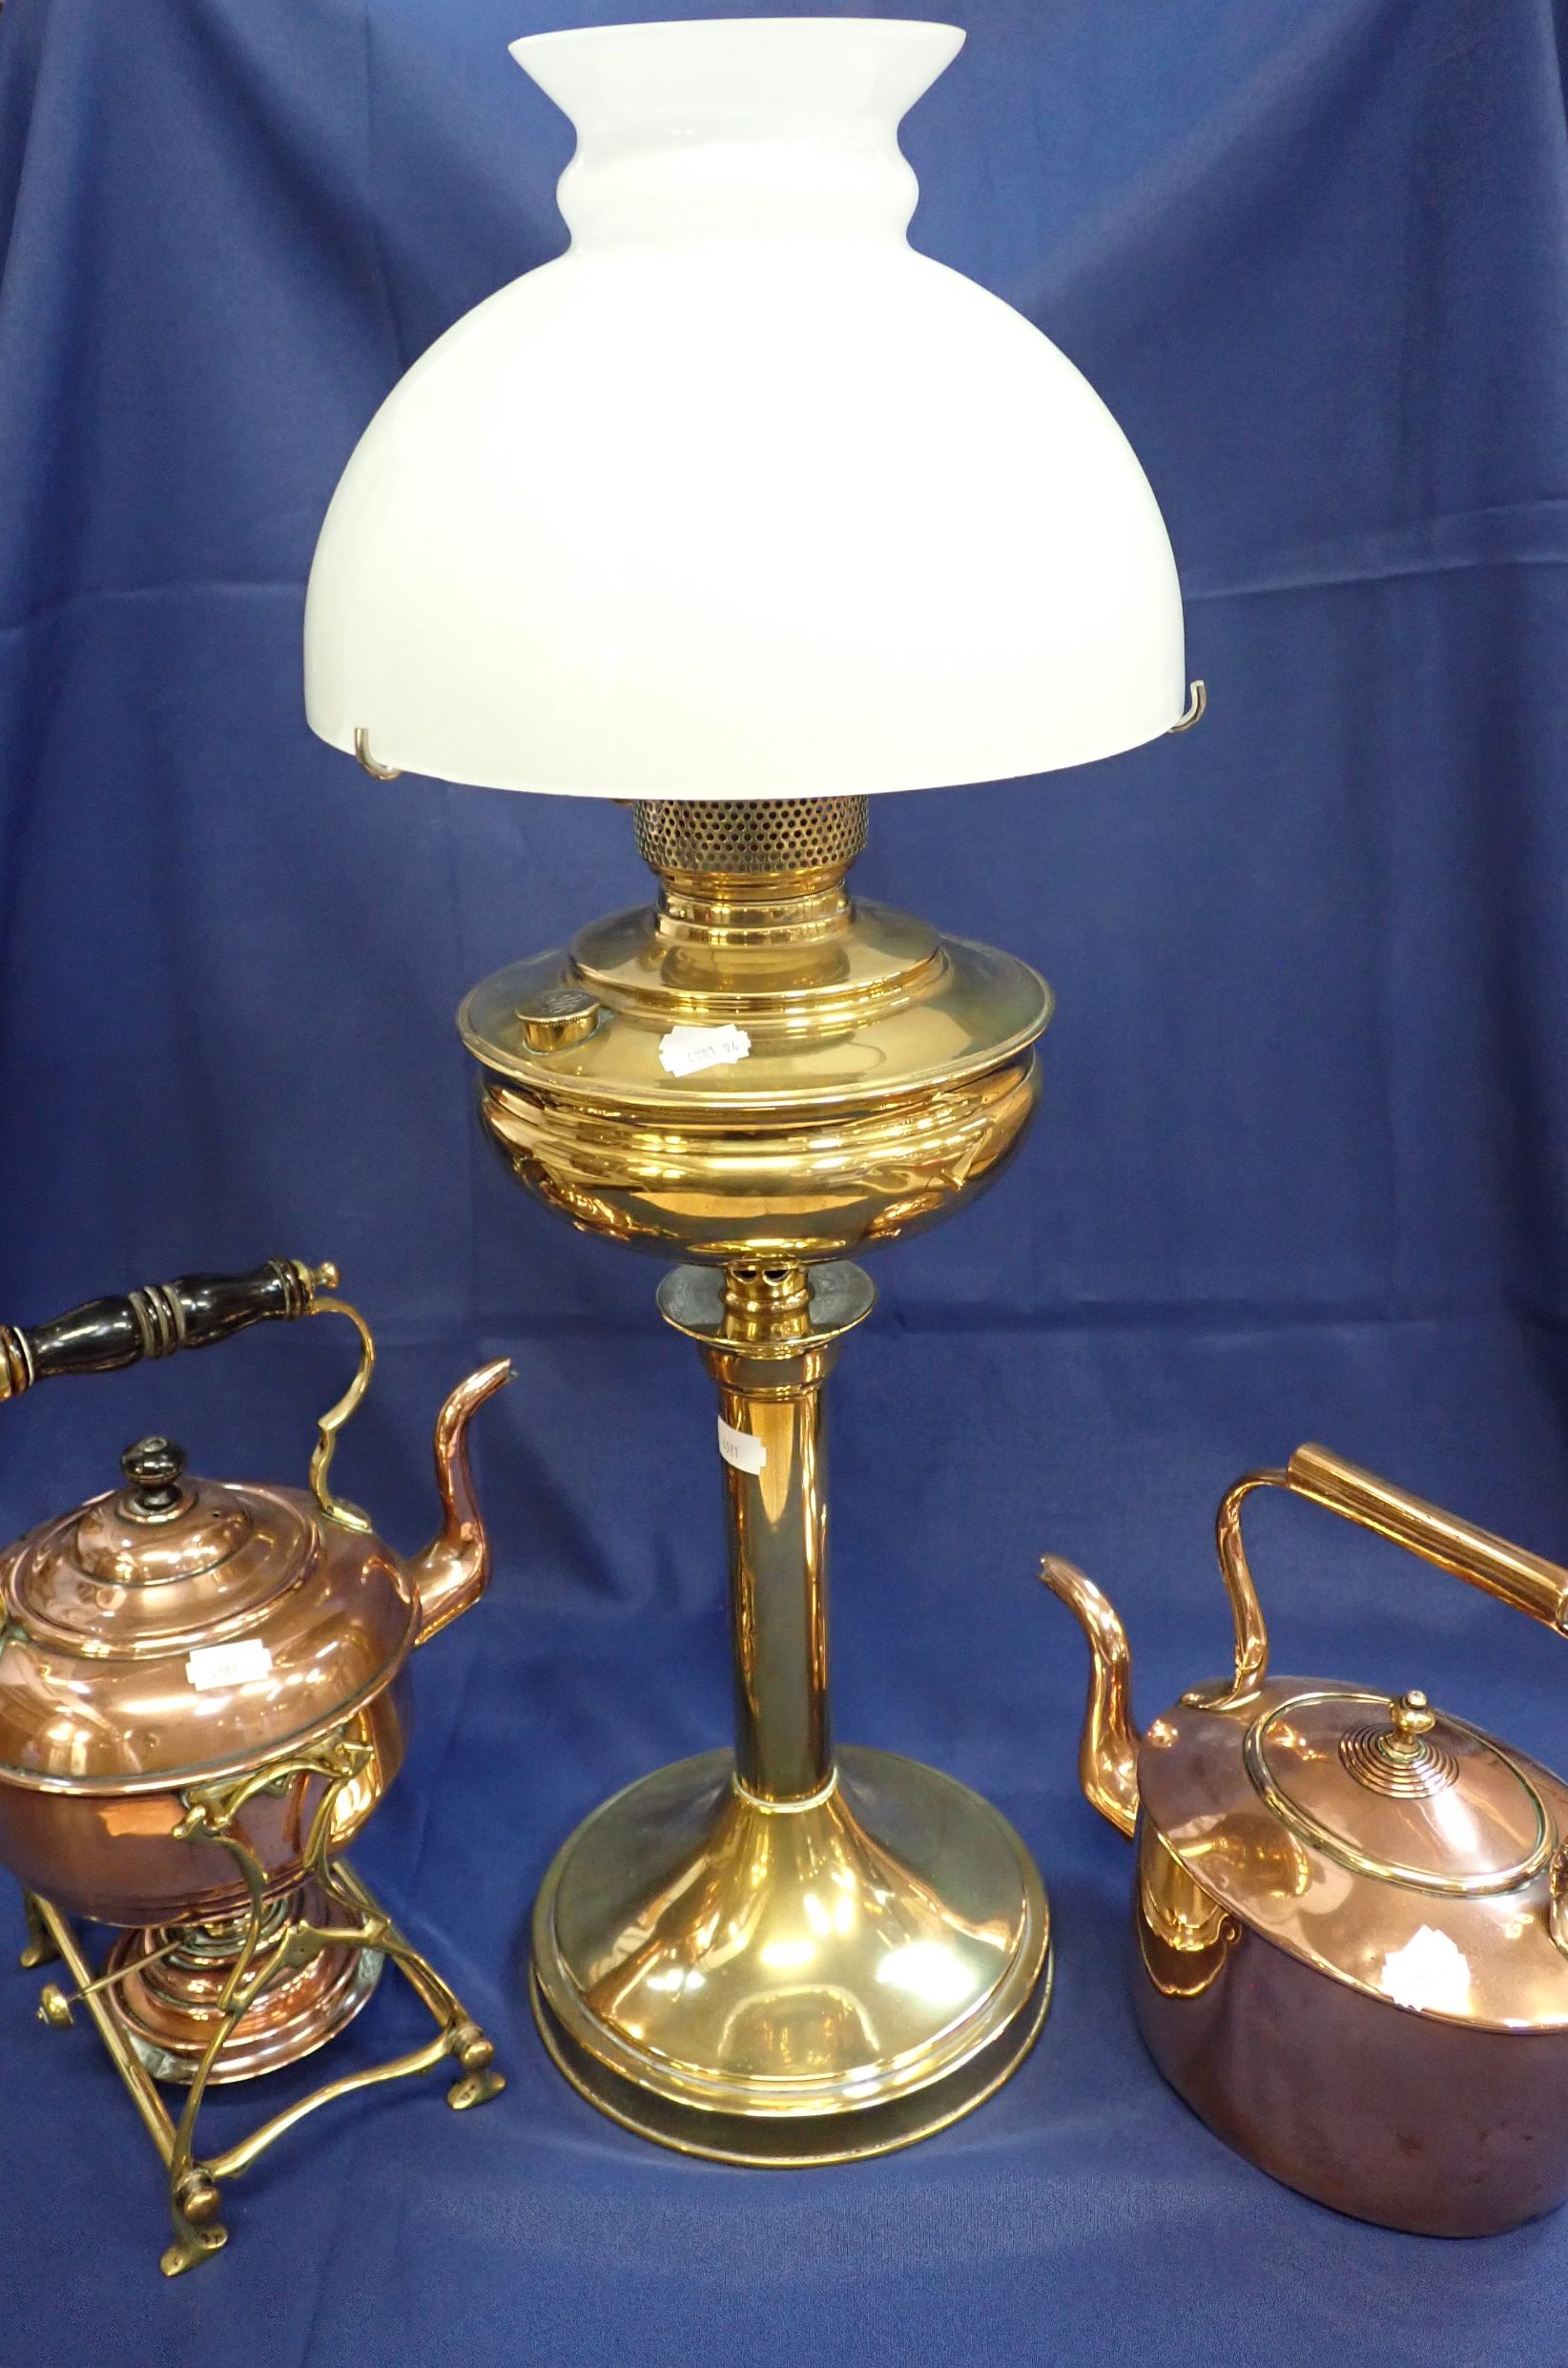 VICTORIAN COPPER KETTLE AND A TEA KETTLE ON STAND